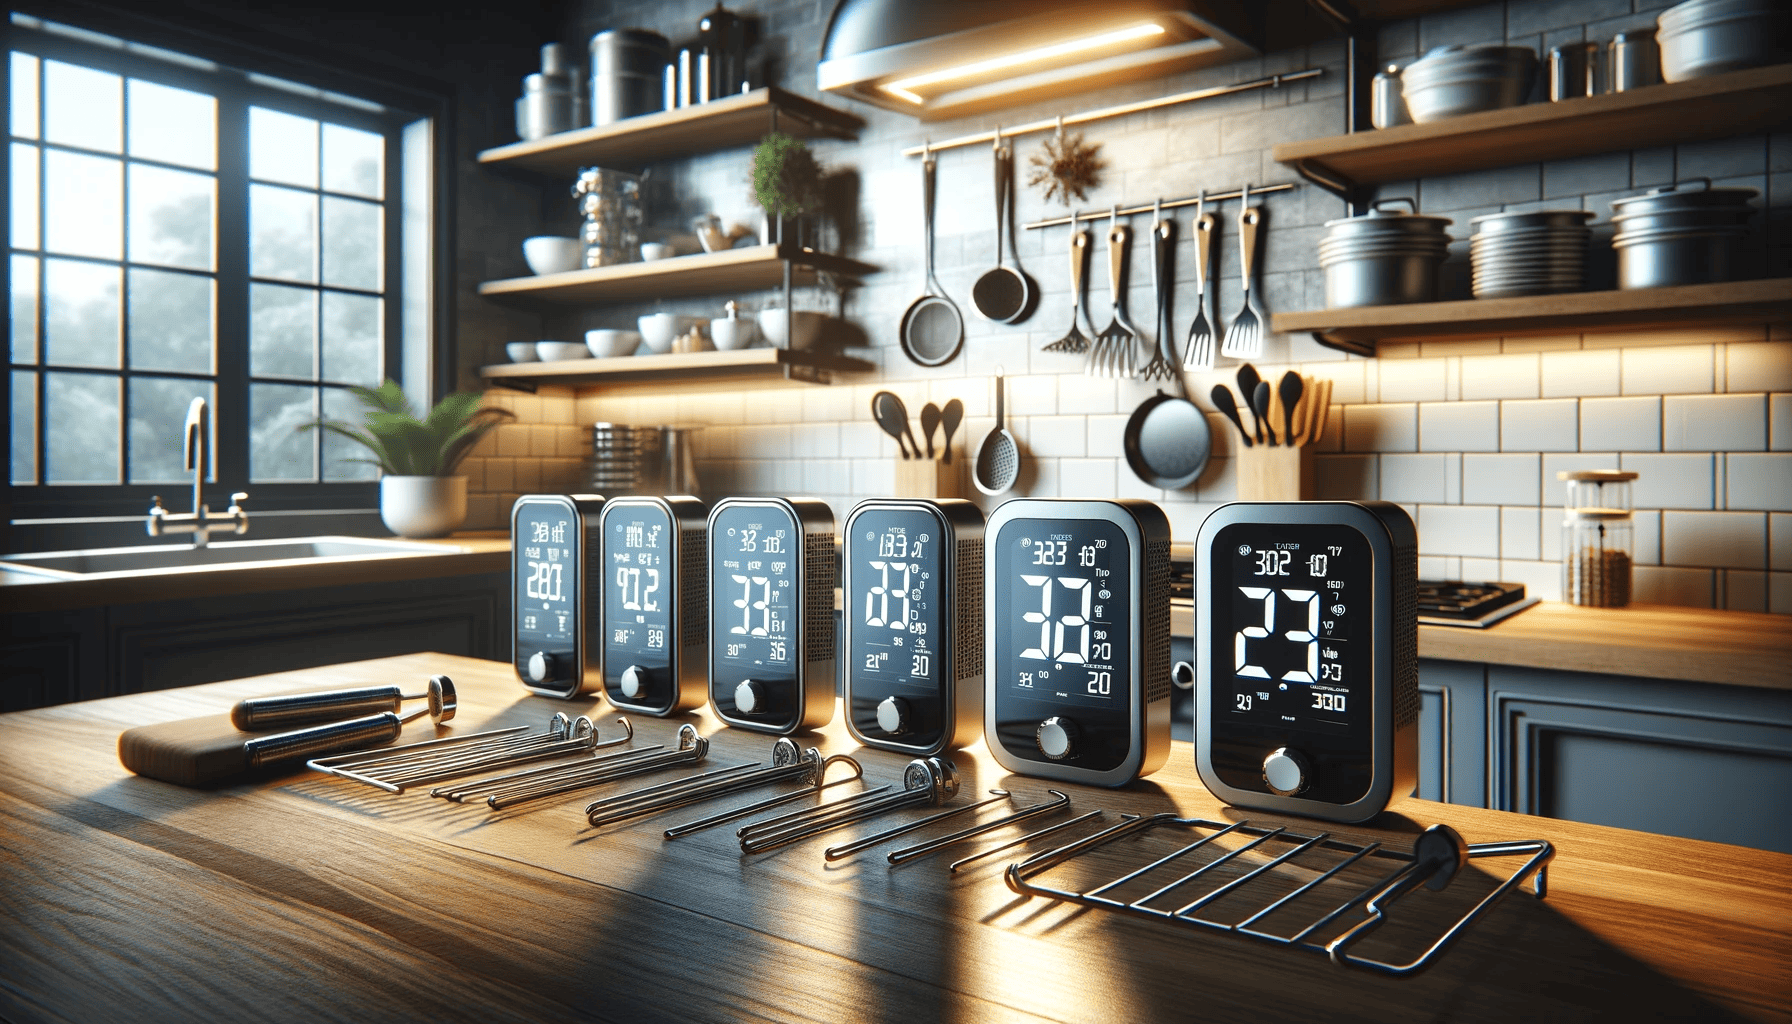 Oven Thermometers with Backlight